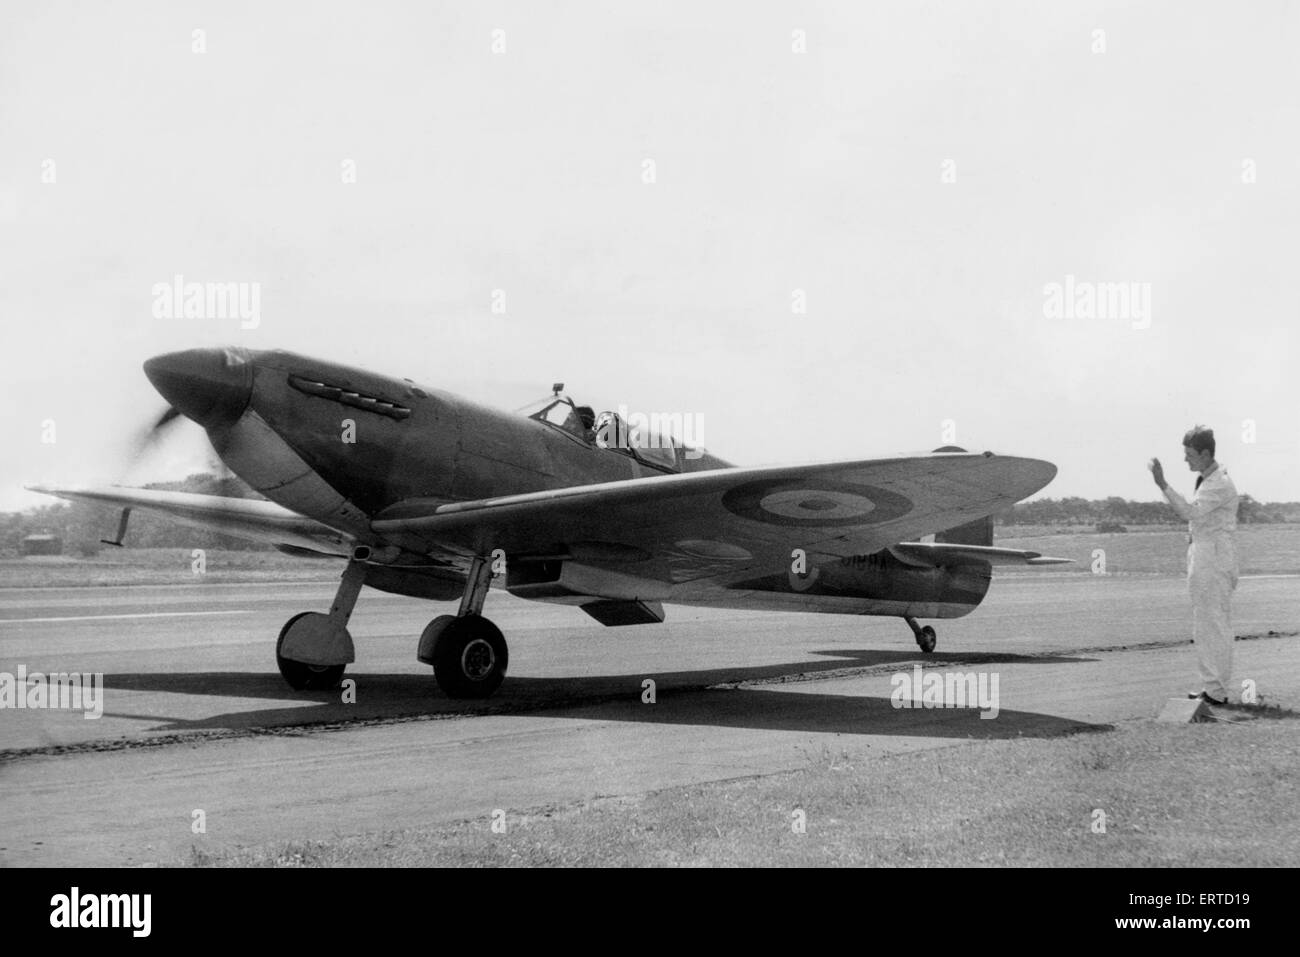 A Spitfire fighter plane arrives at Isworth Airport, flown by Squadron leader John Hobbs for the Sunderland Flying Club display. June 1967. Stock Photo